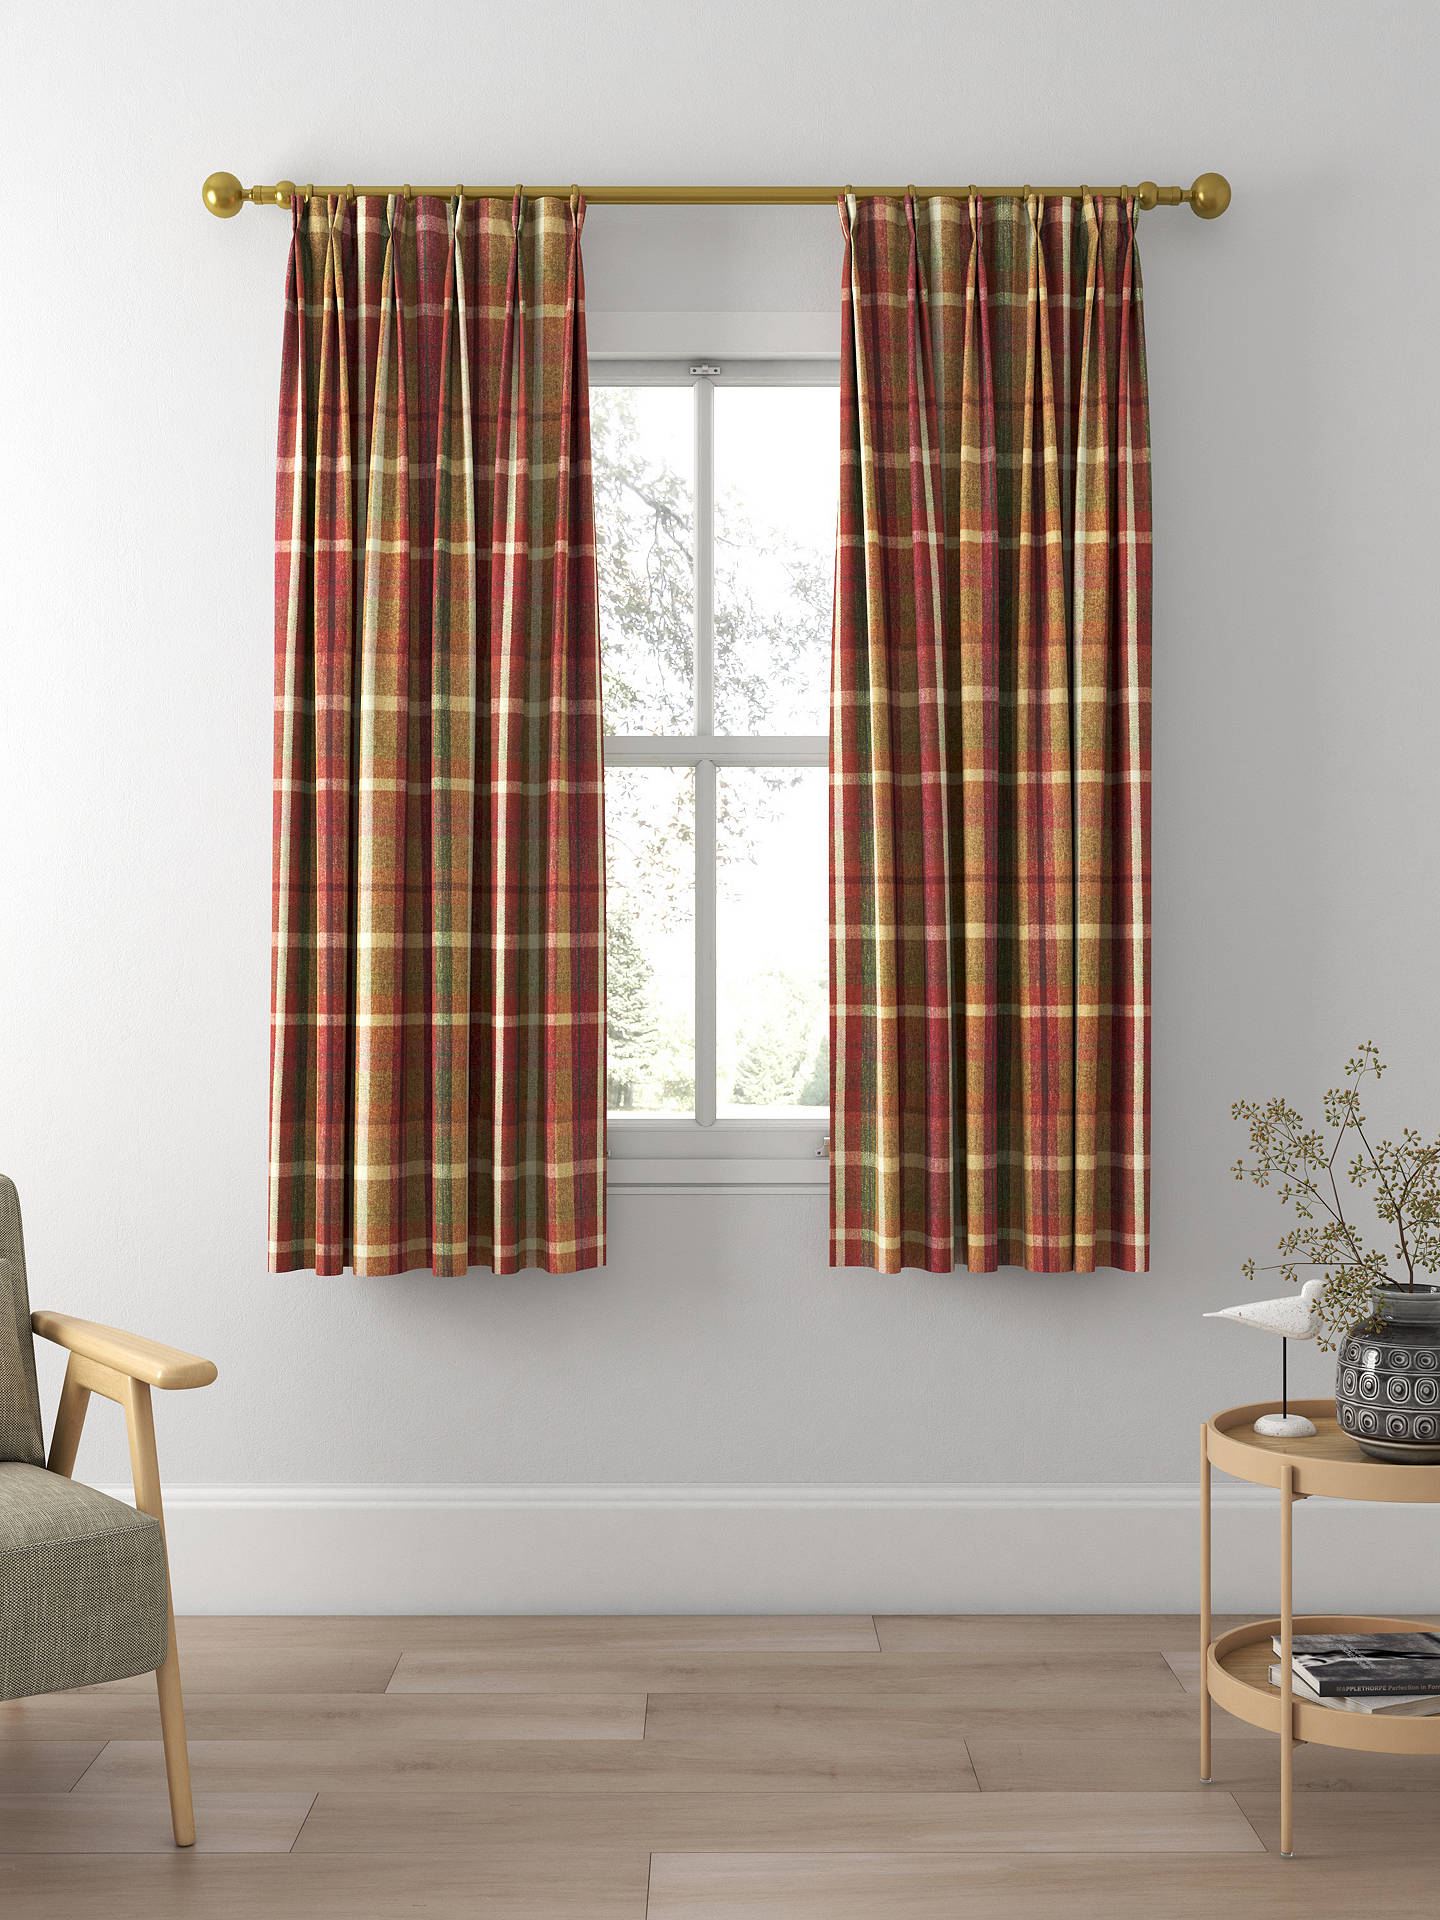 Prestigious Textiles Galloway Made to Measure Curtains, Rustic